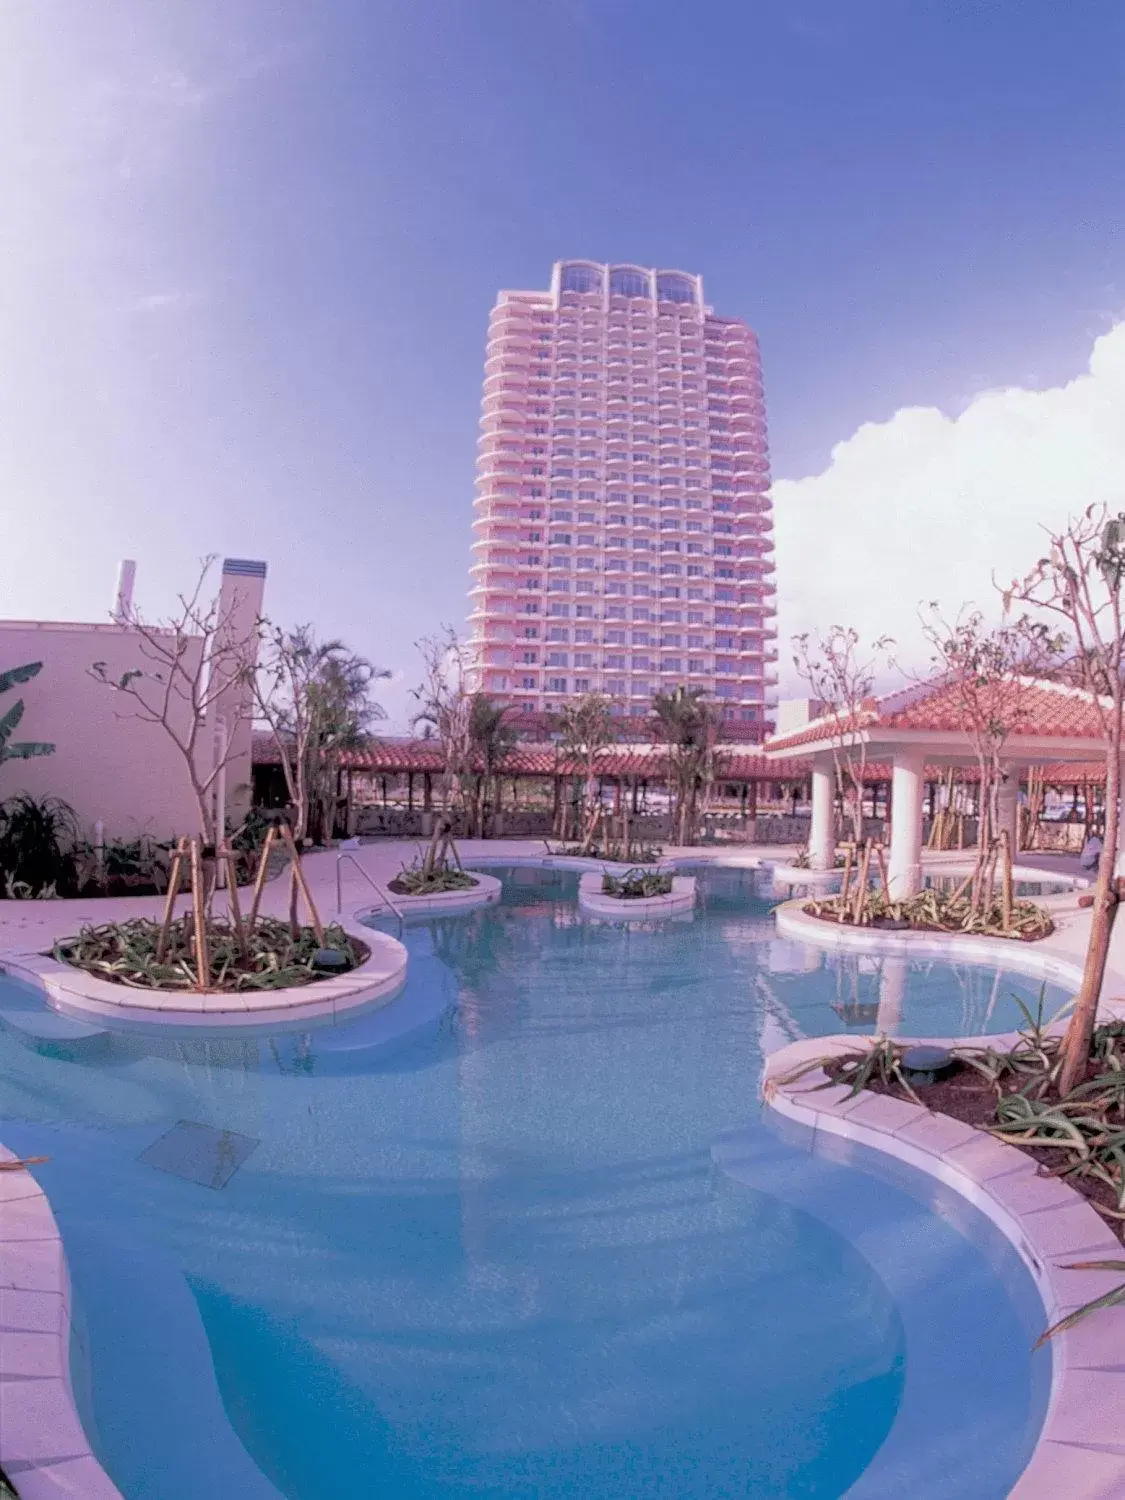 Property building, Swimming Pool in The Beach Tower Okinawa Hotel